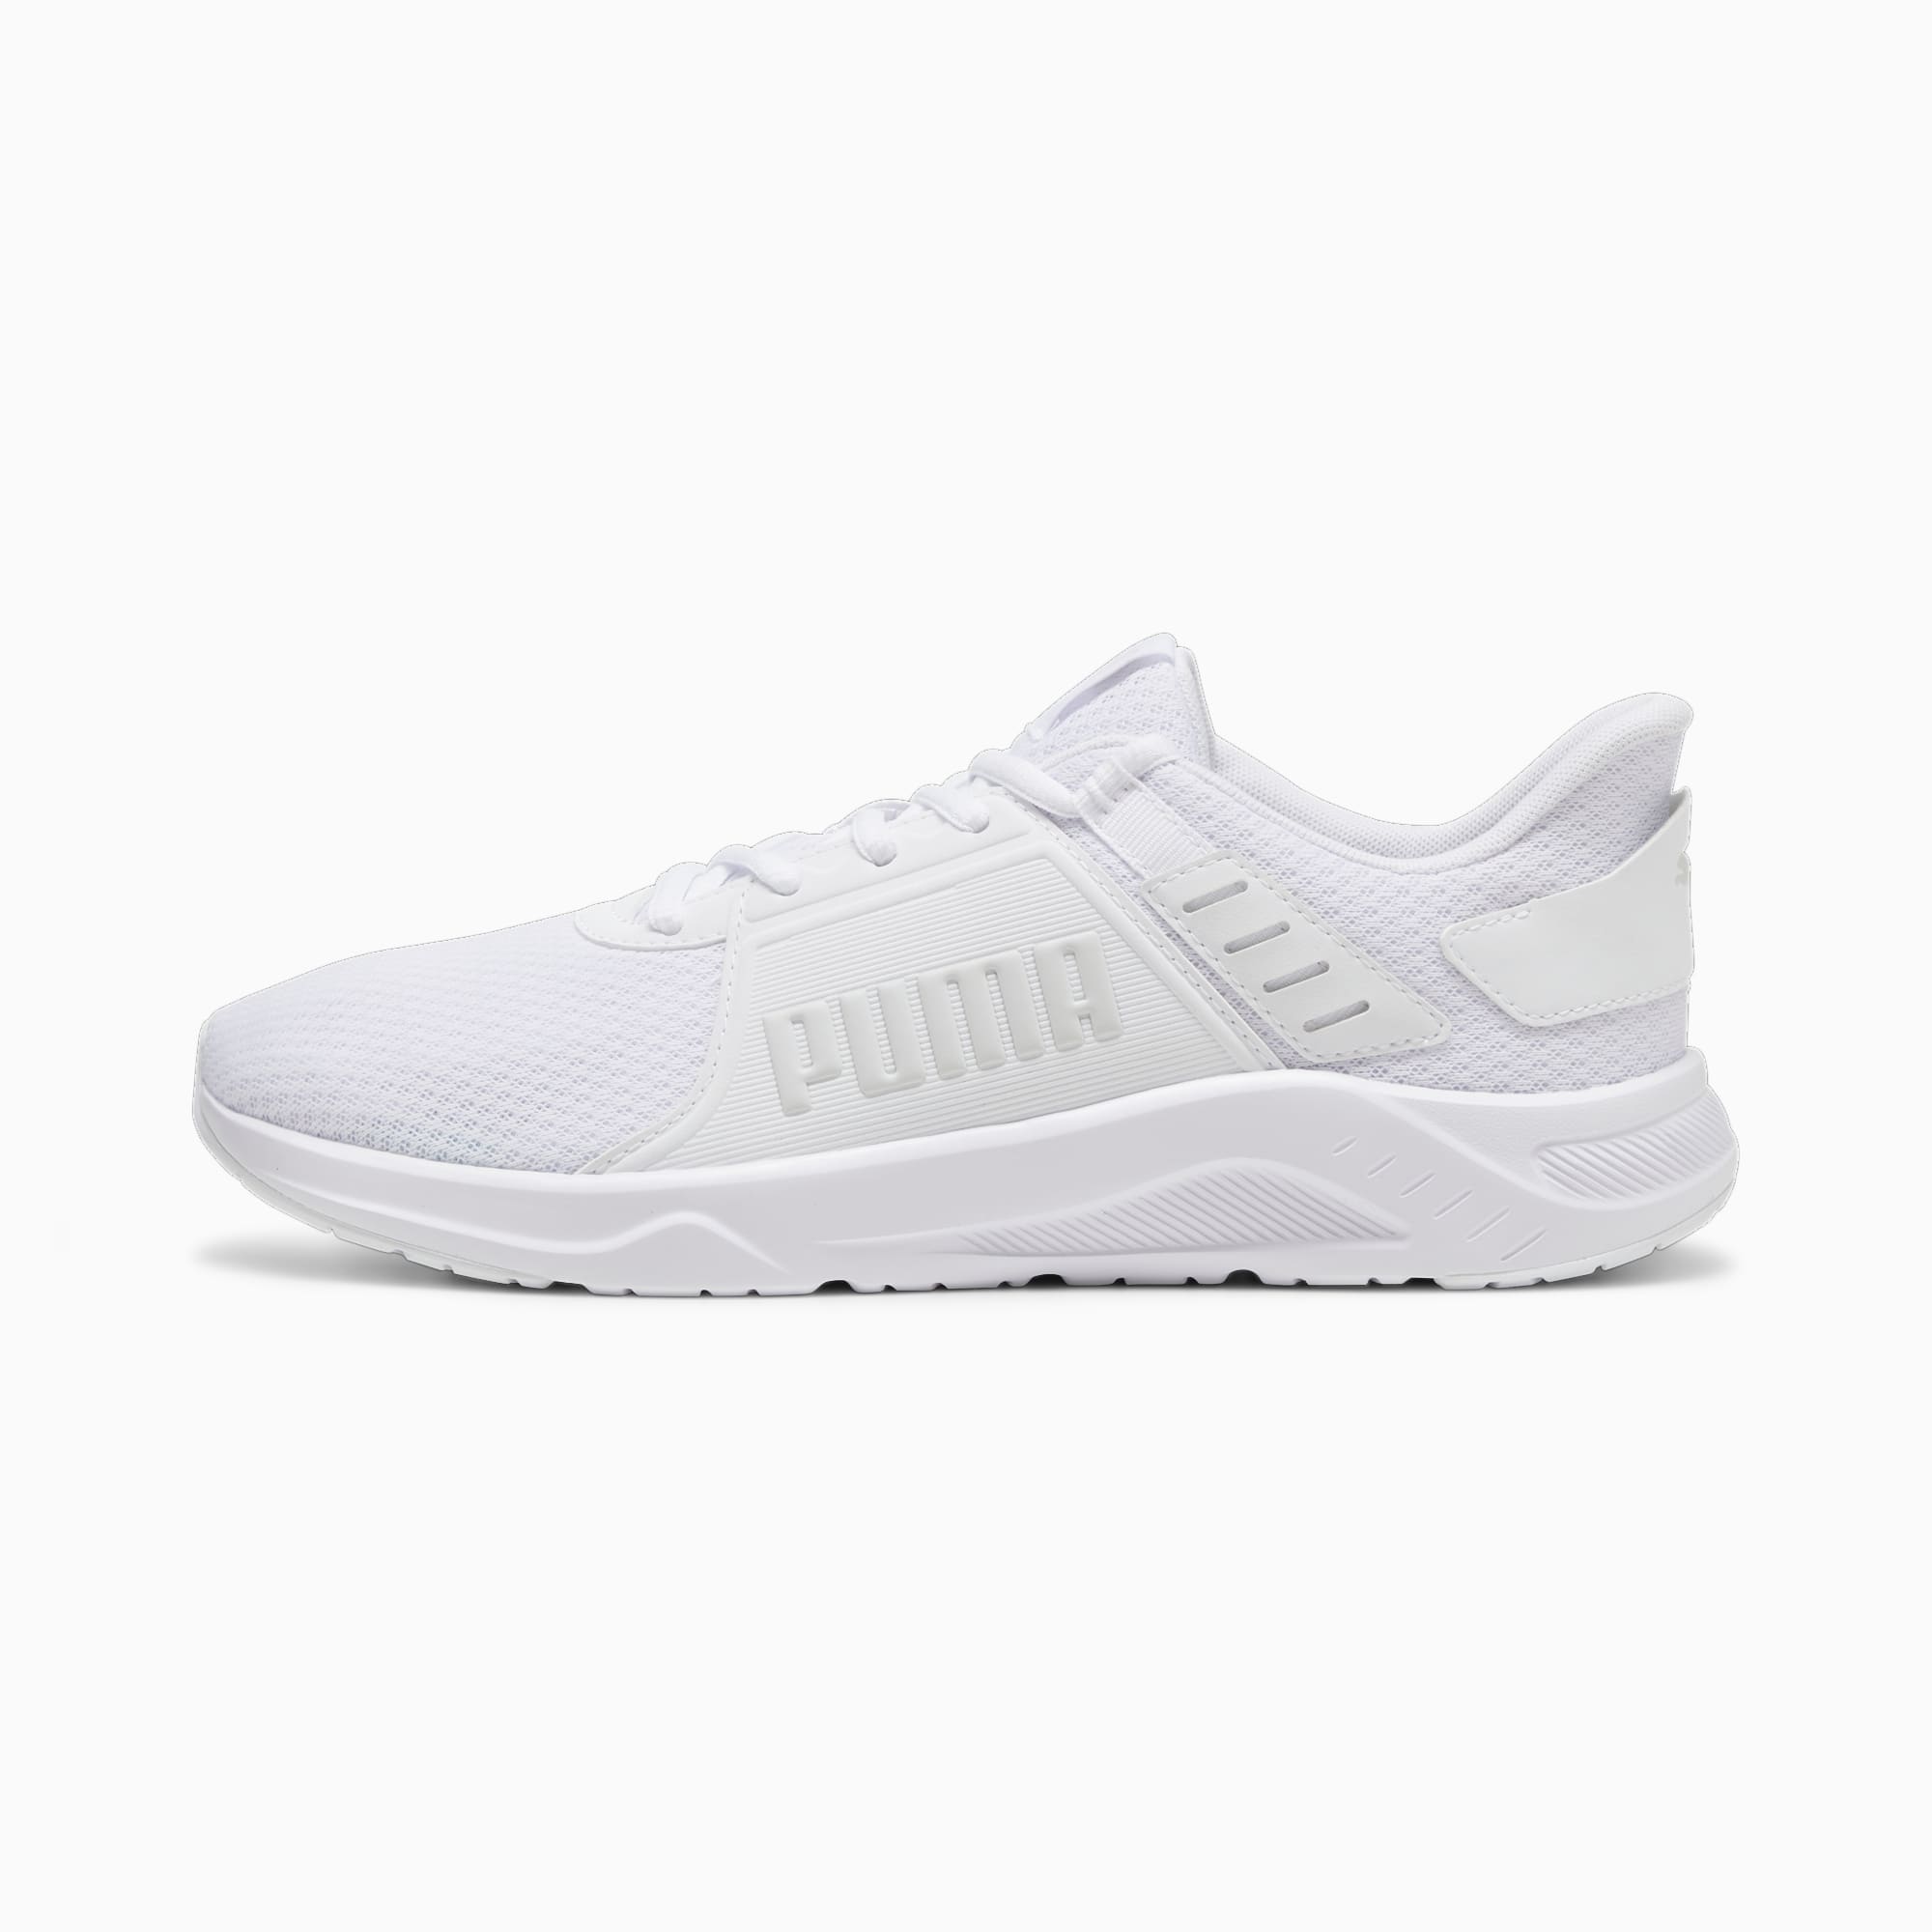 Women's PUMA Ftr Connect Training Shoes, White/Feather Grey, Size 35,5, Shoes